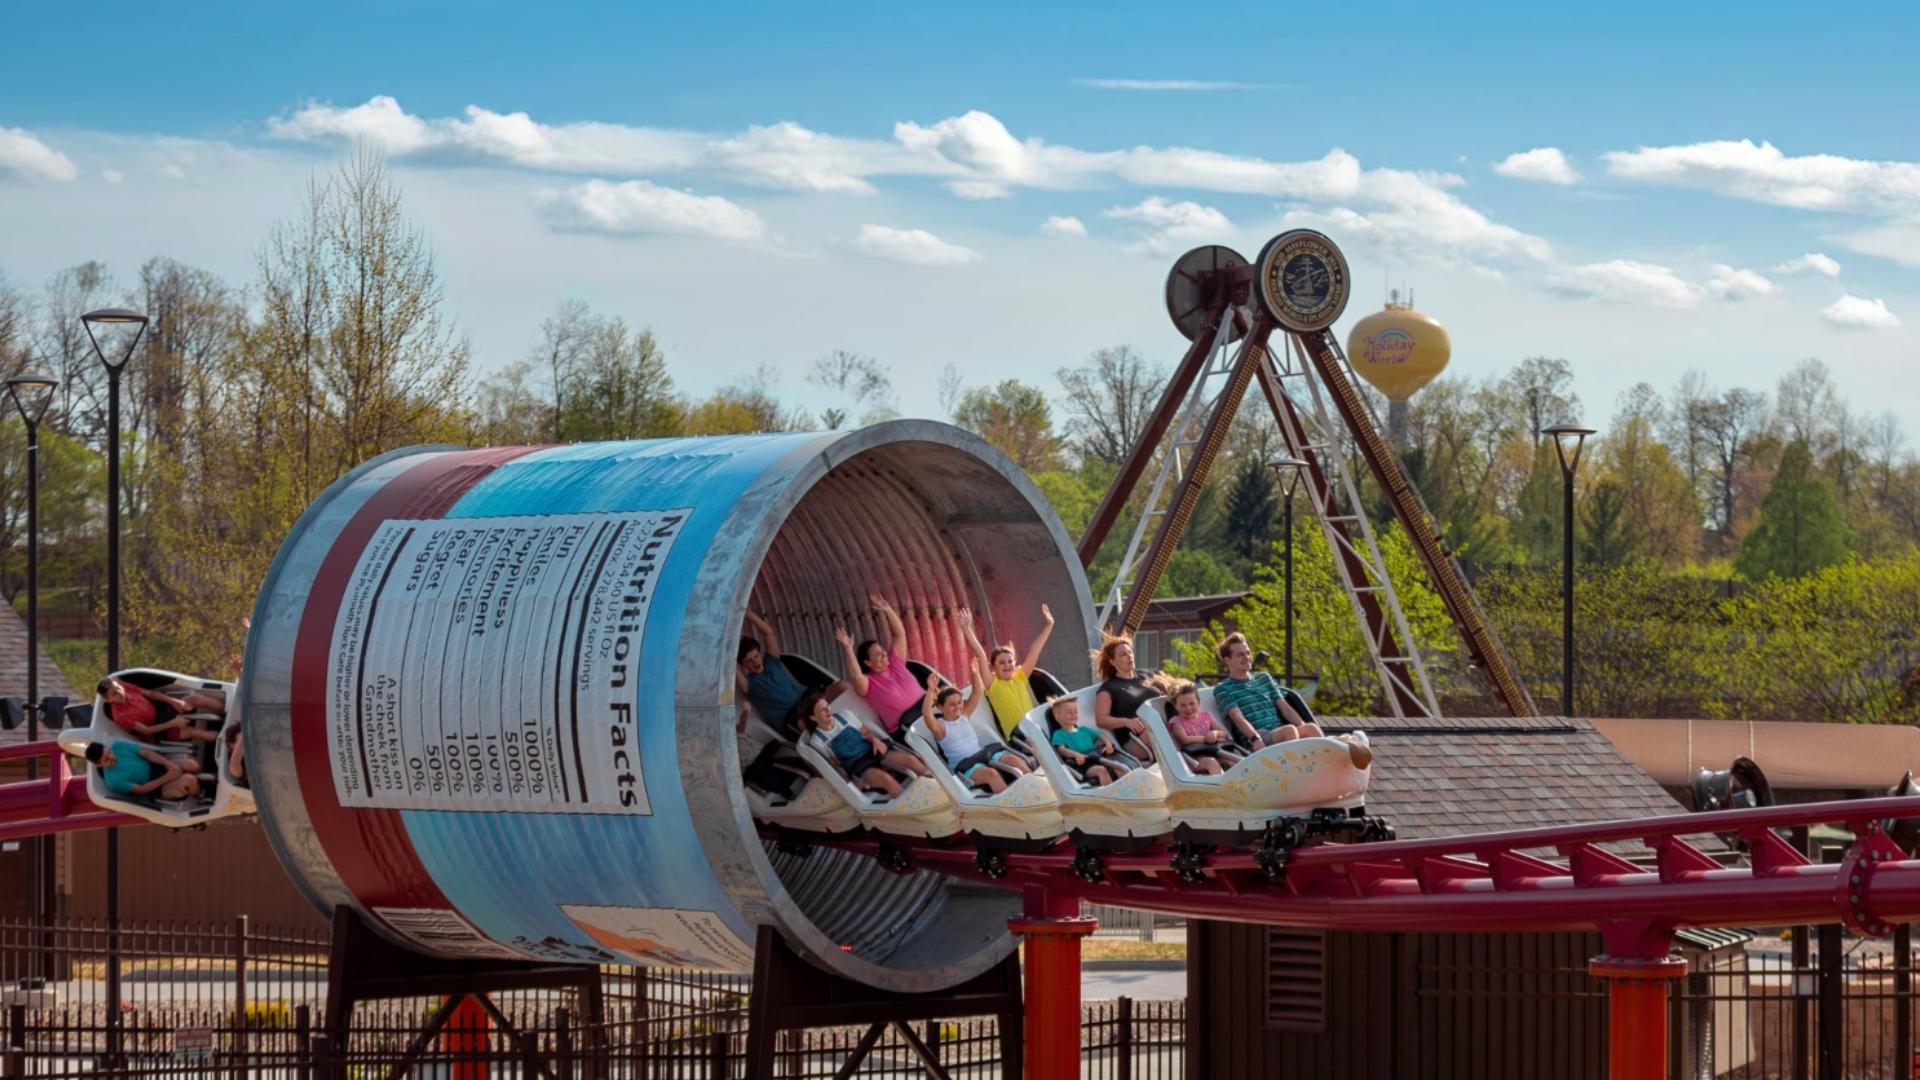 Holiday World opens for the season on Saturday, May 11.